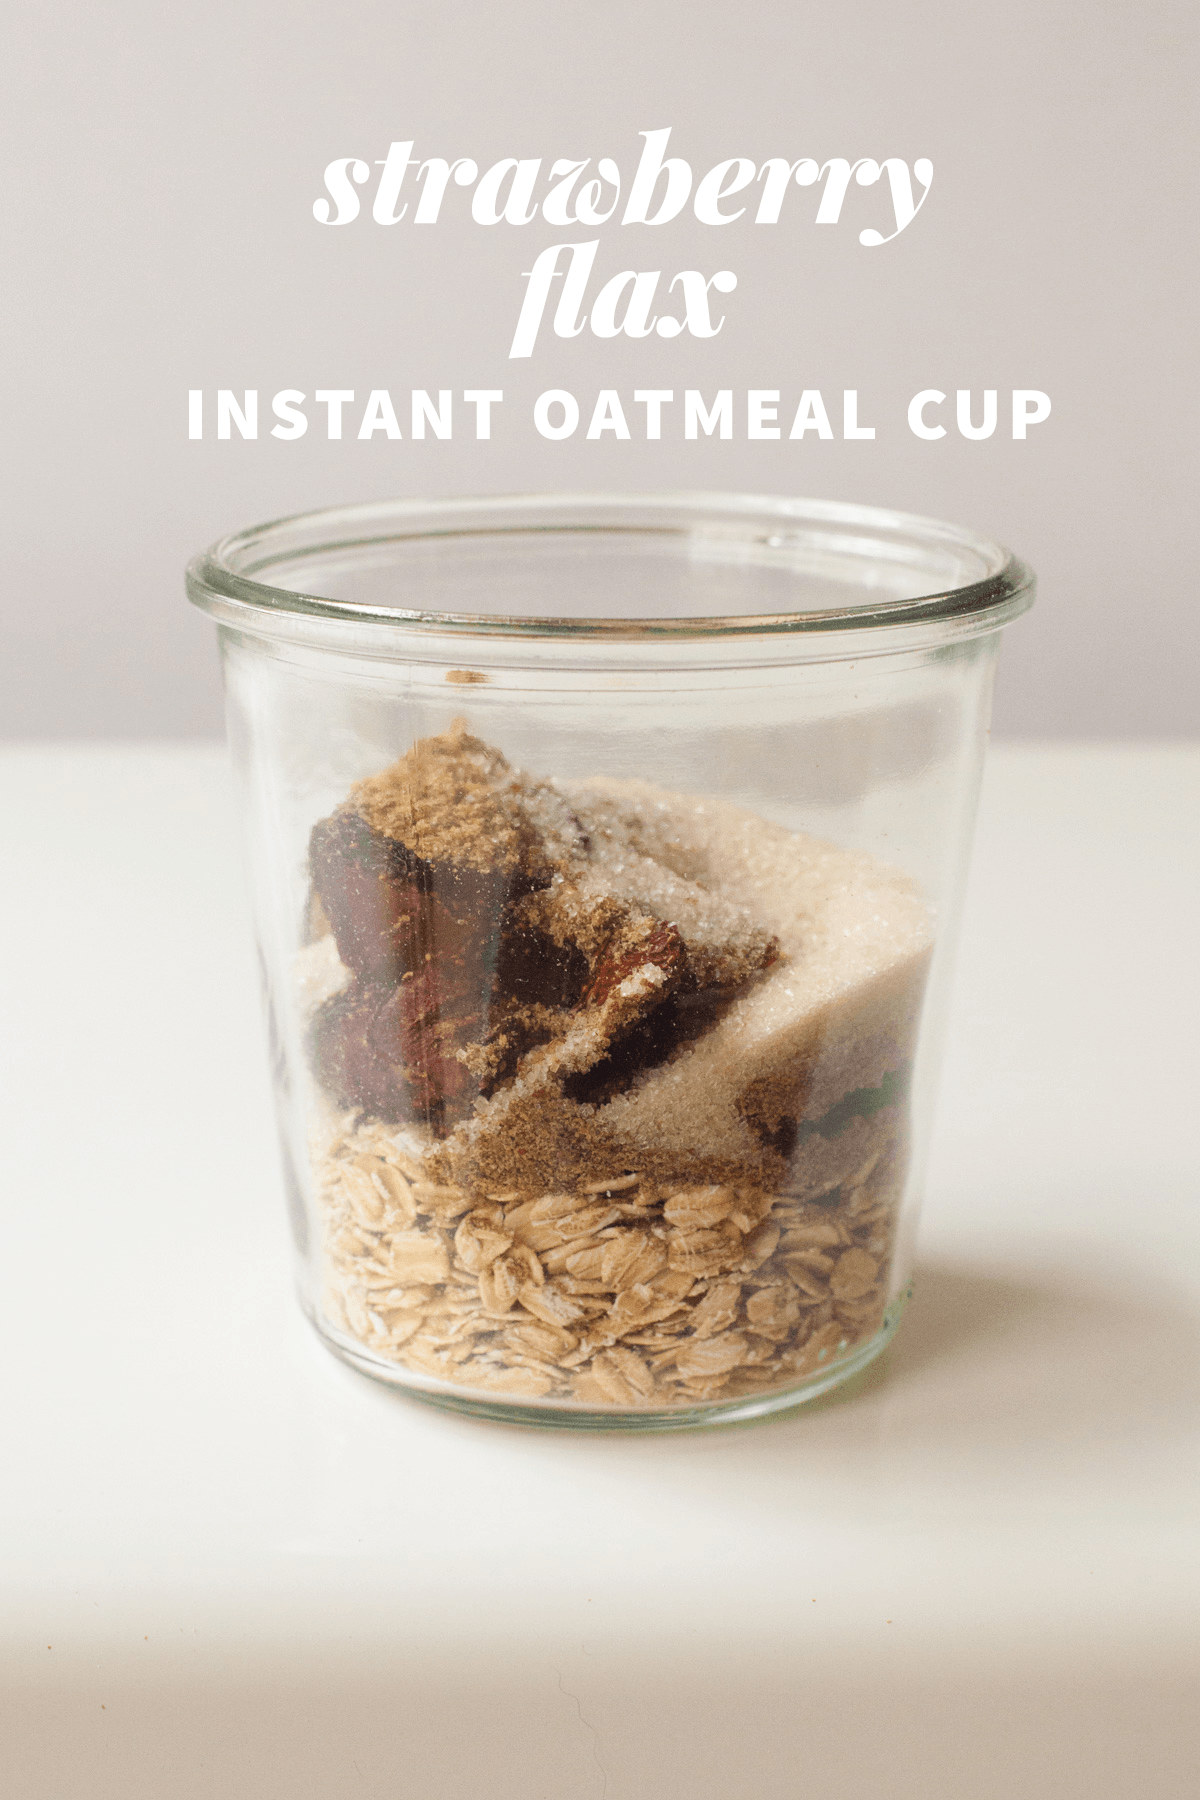 Healthy Instant Oatmeal Cups—Strawberry Flax